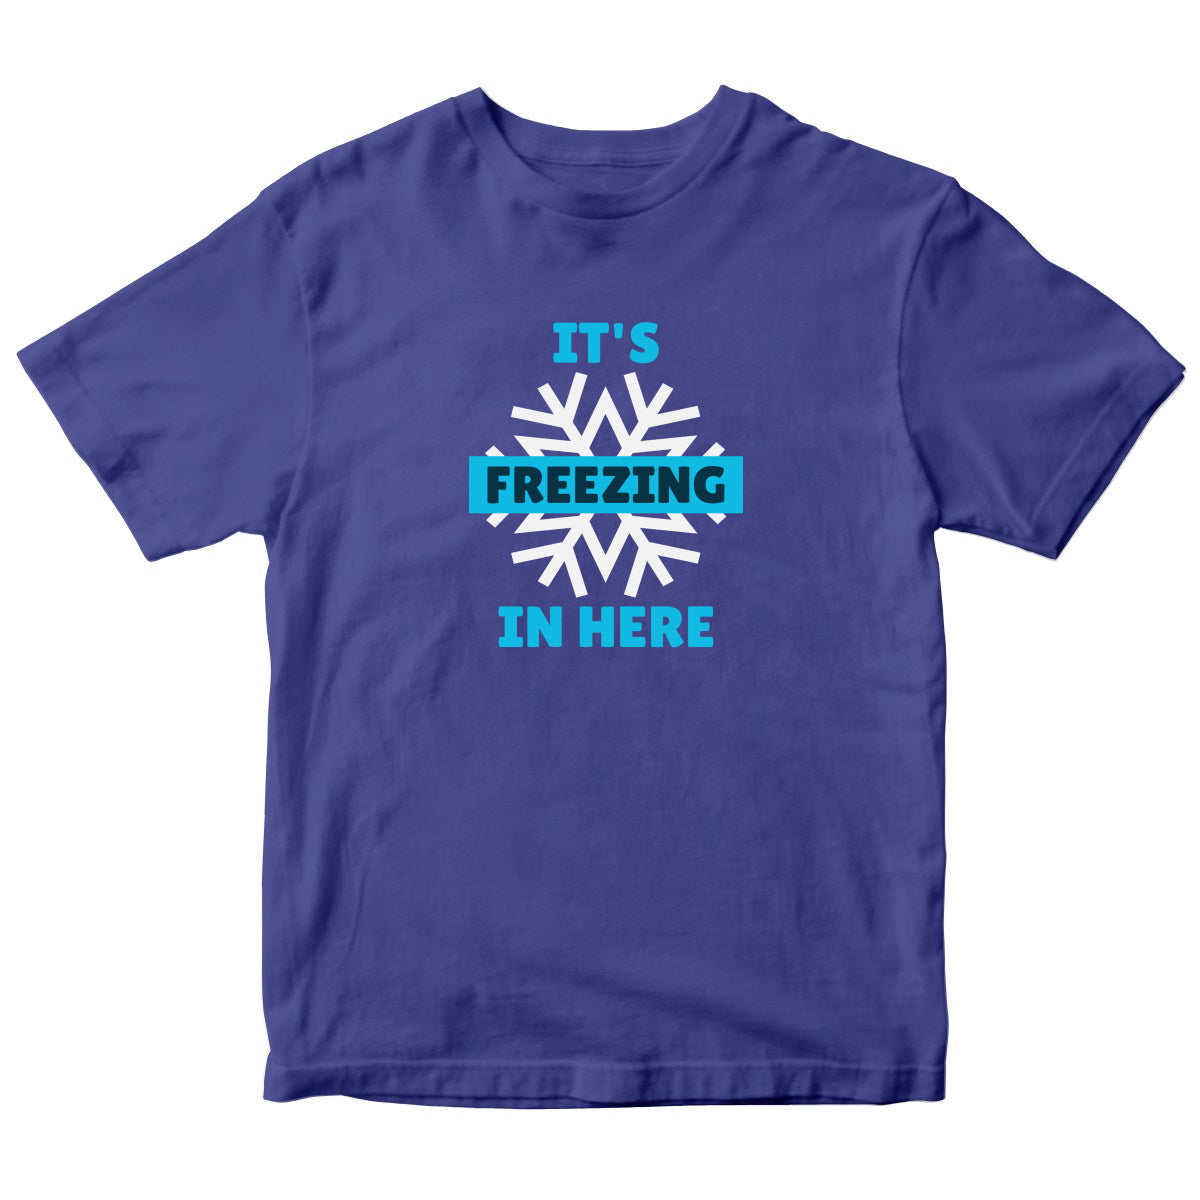 It's Freezing In Here! Kids T-shirt